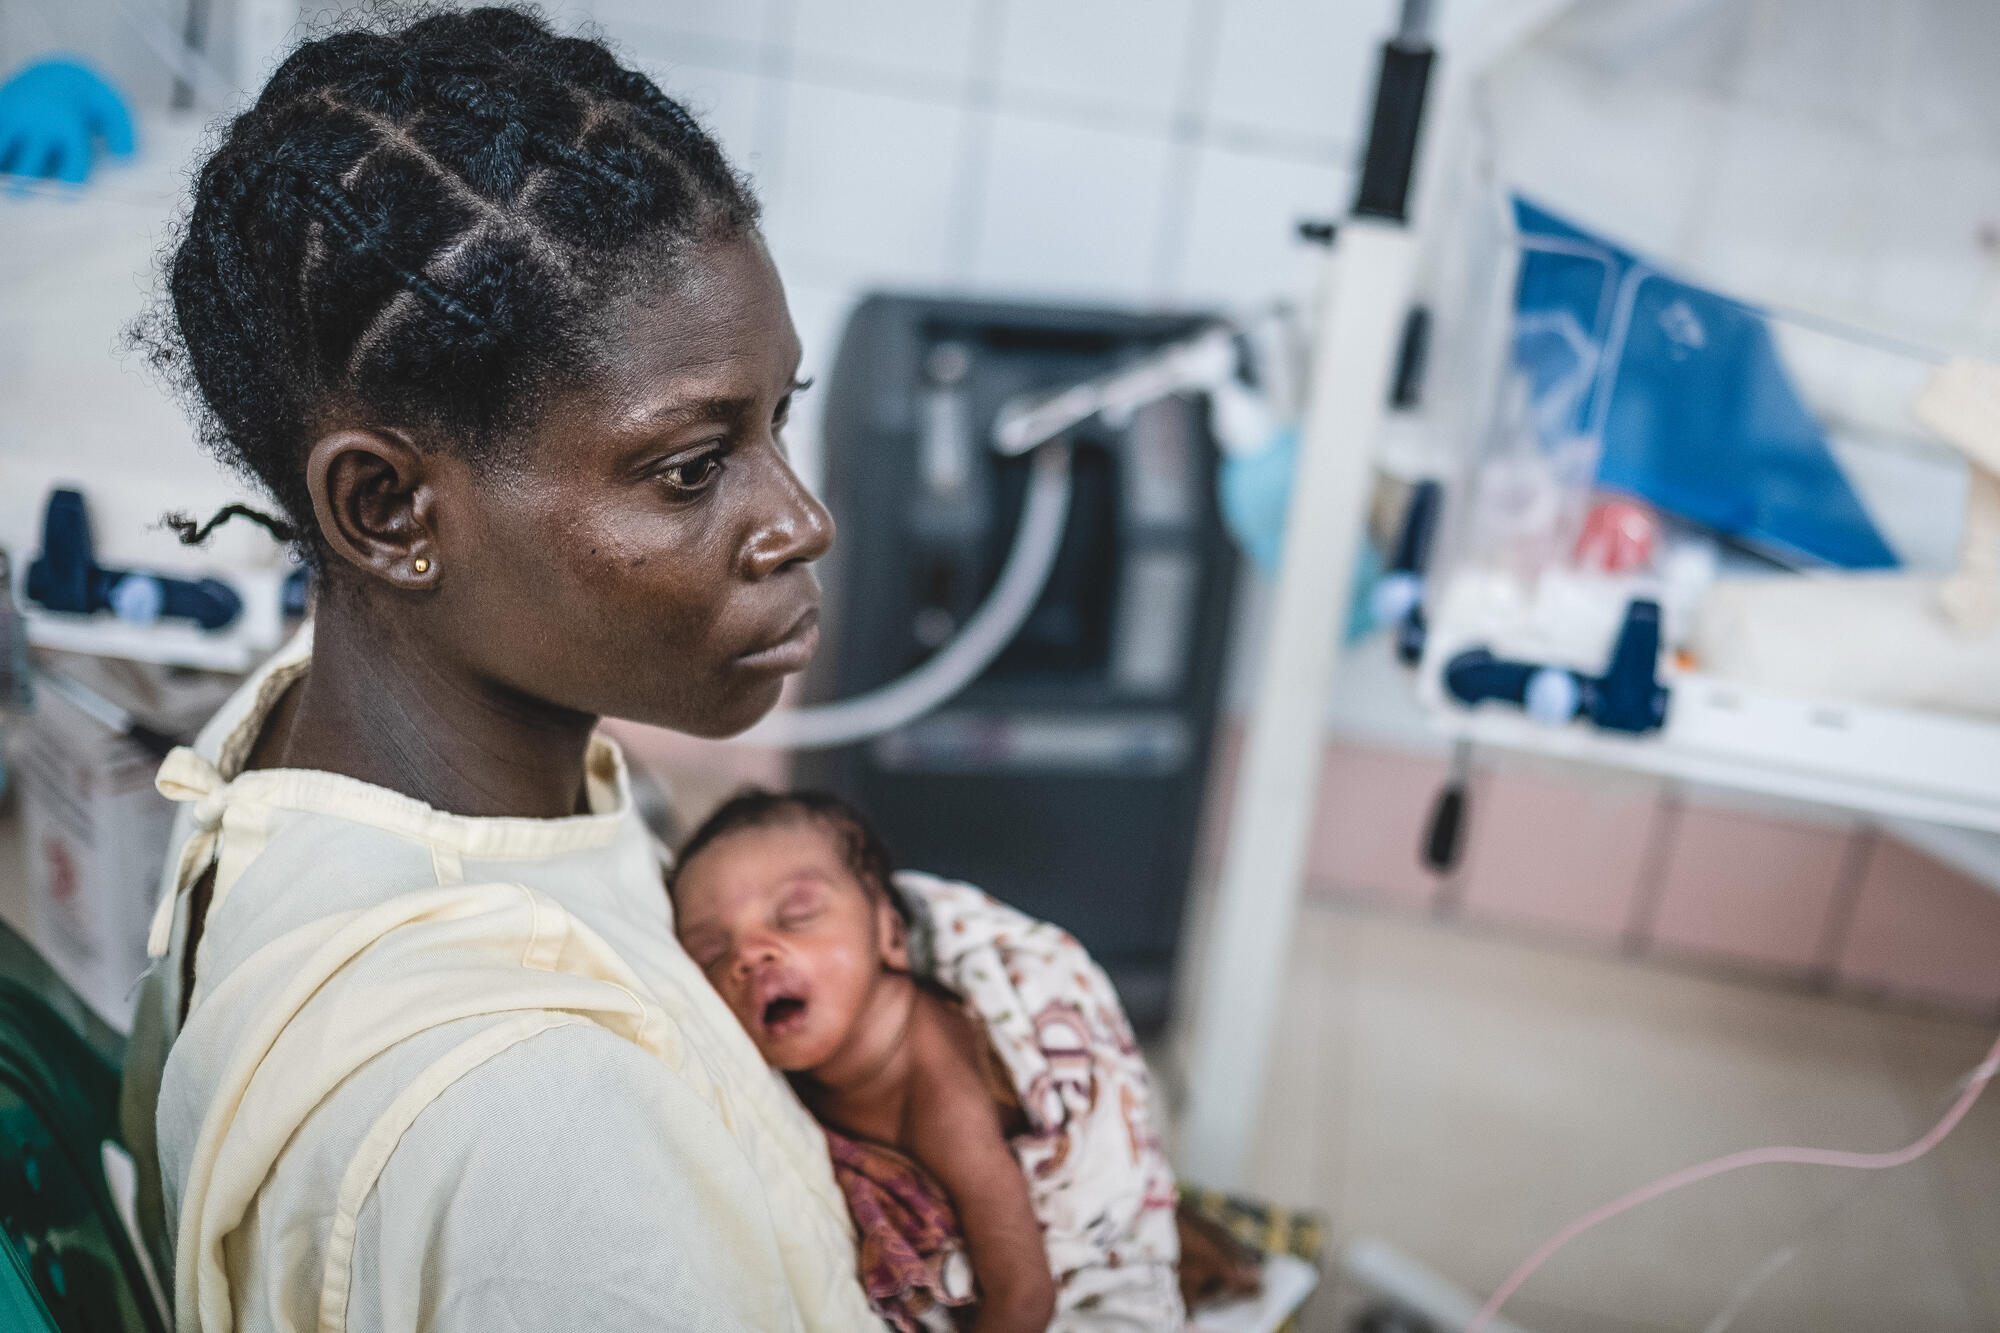 “To give birth is to take a risk”: The maternity care crisis in the Central African Republic